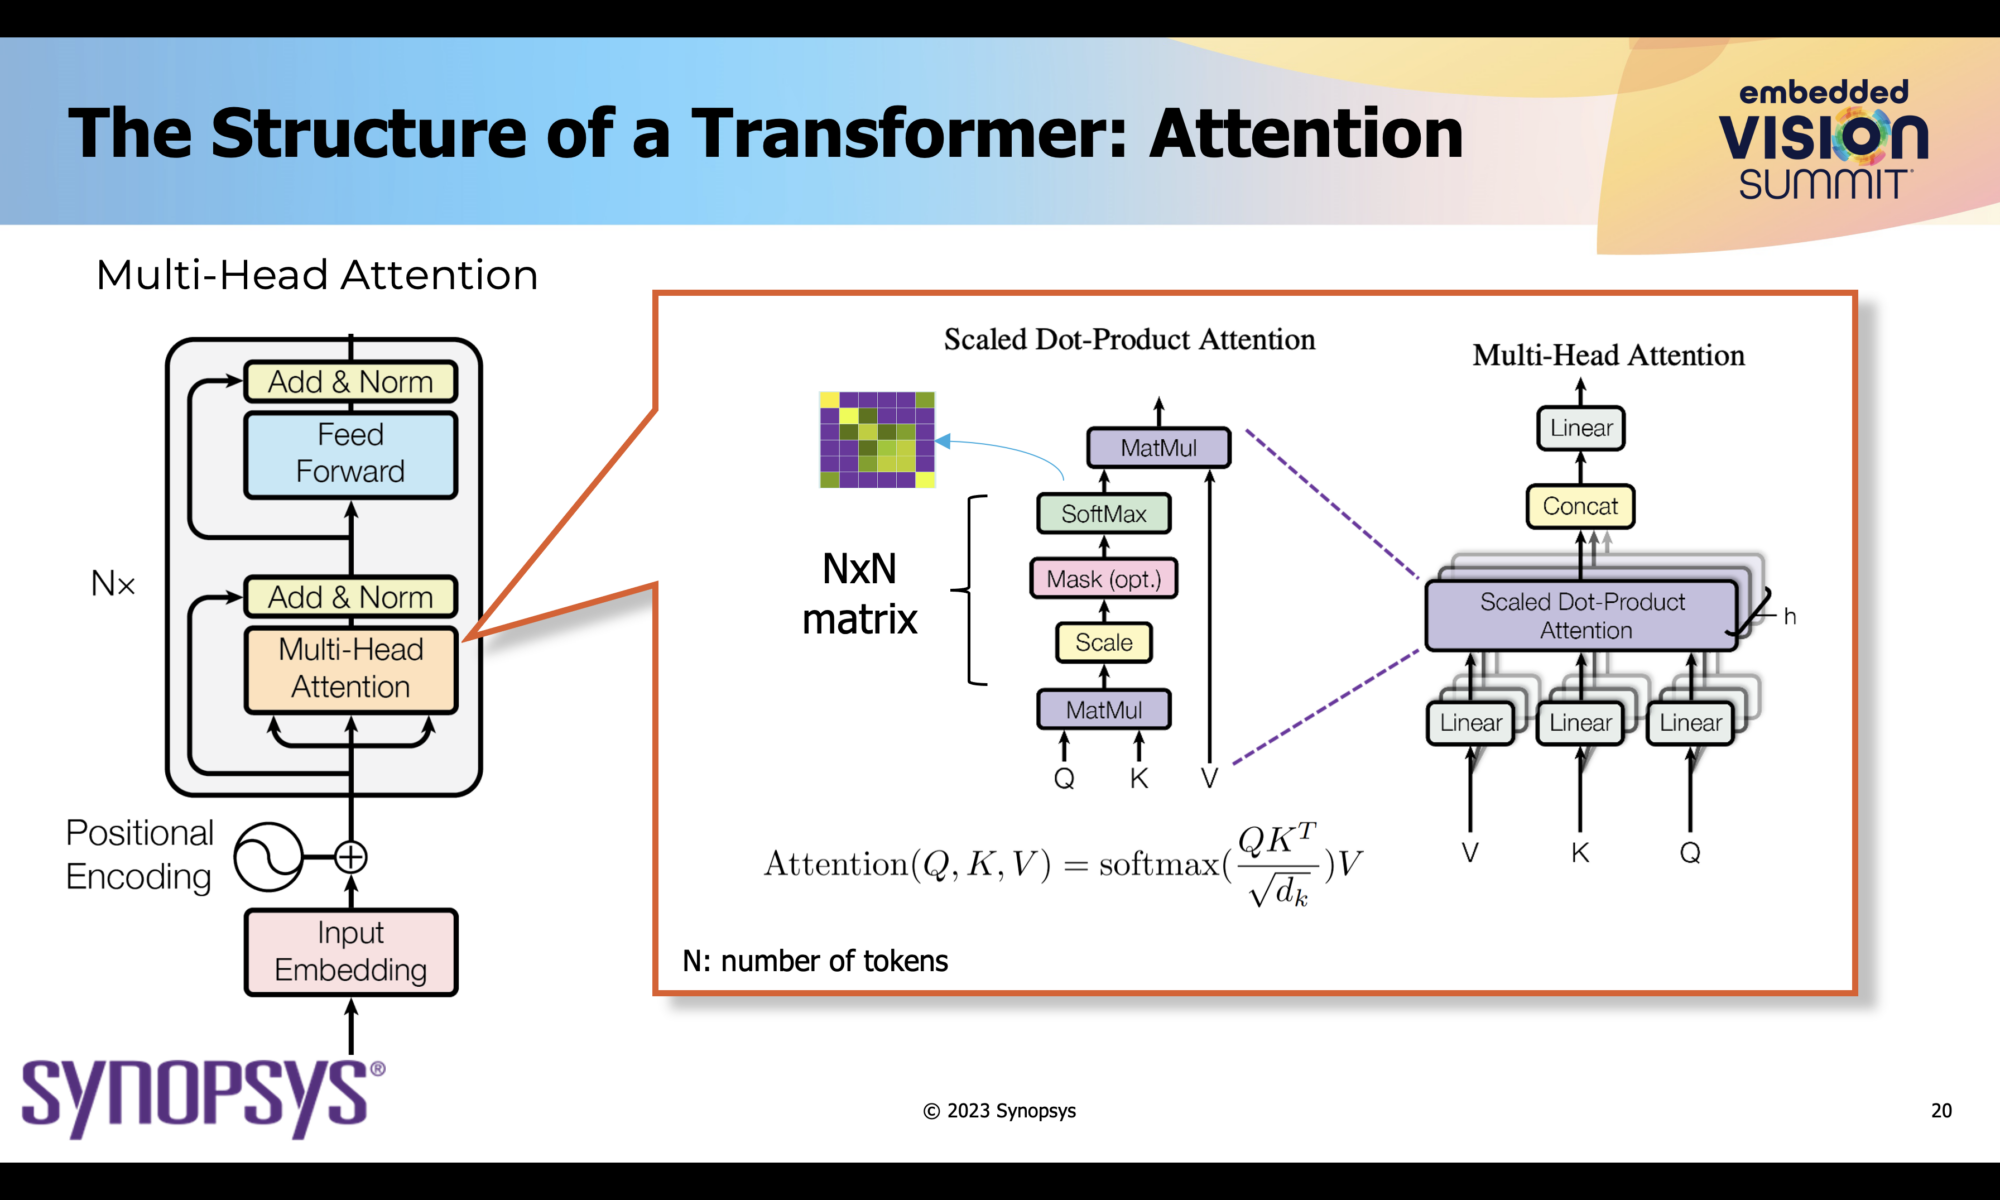 The Structure of a Transformer: Attention